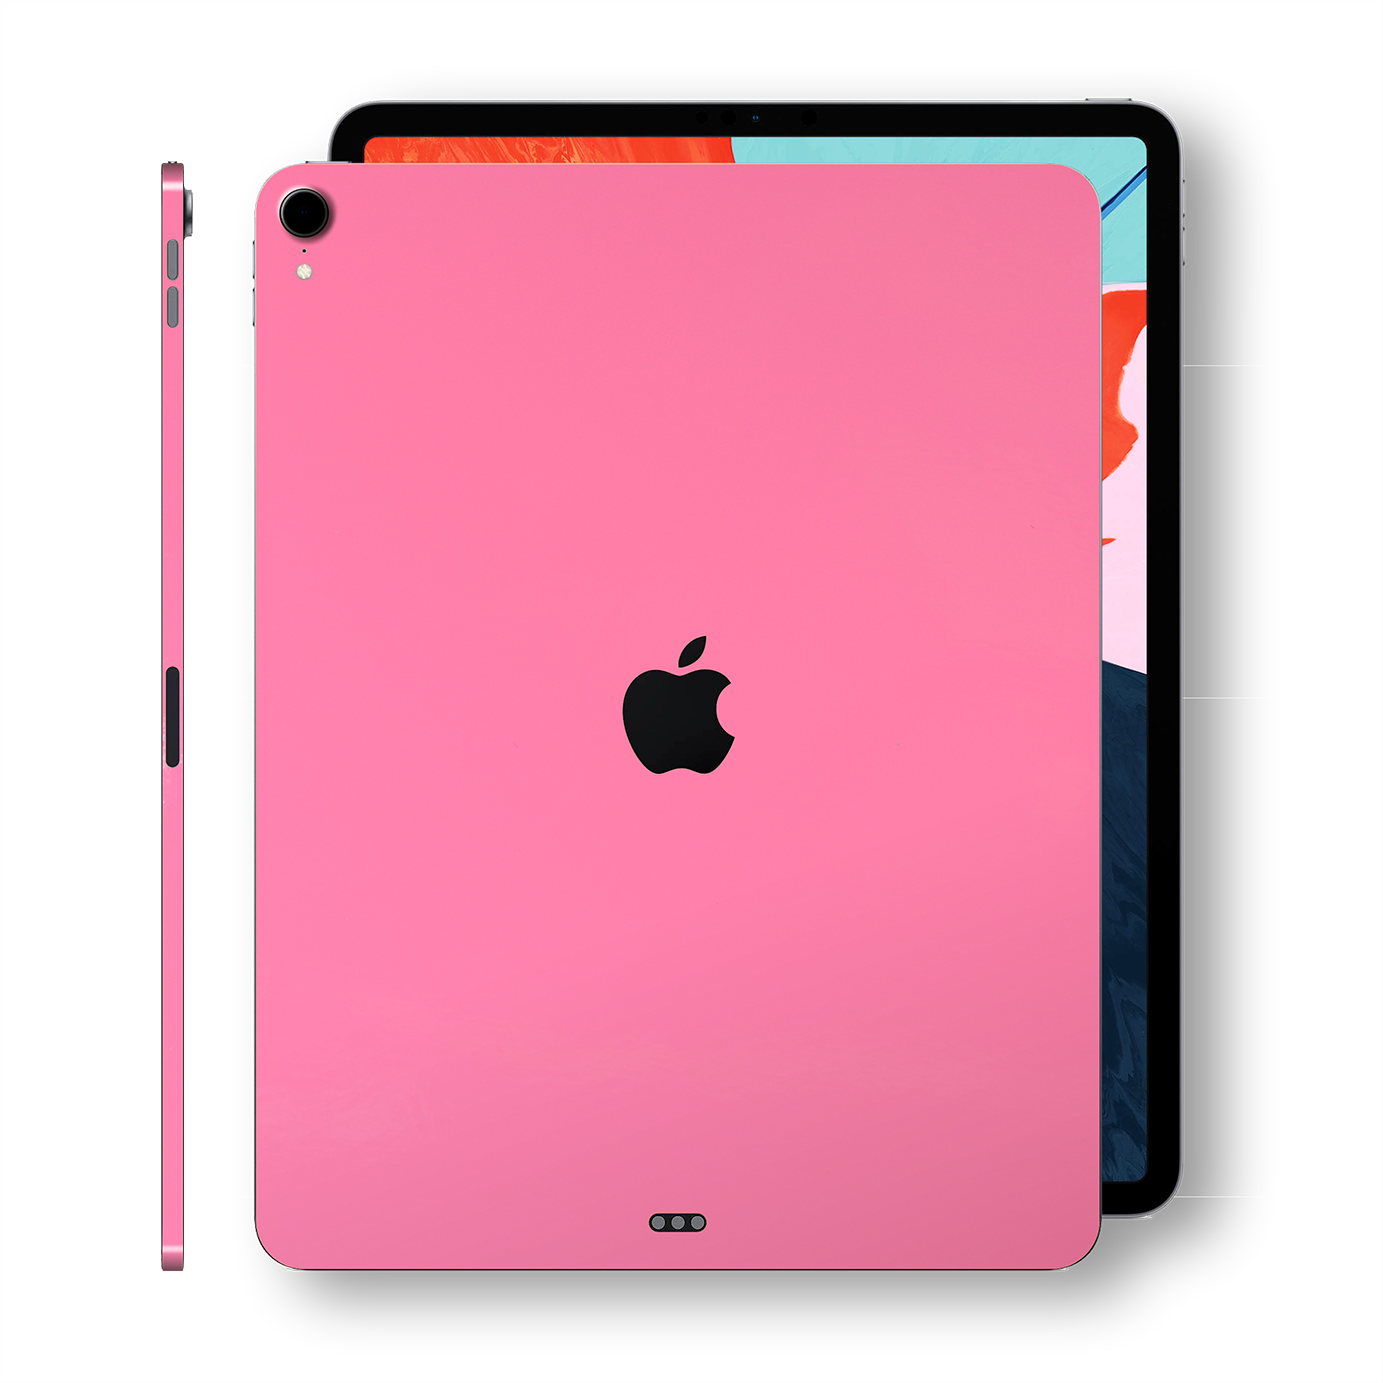 iPad PRO 11-inch 2018 Glossy 3M HOT PINK Skin Wrap Sticker Decal Cover Protector by EasySkinz